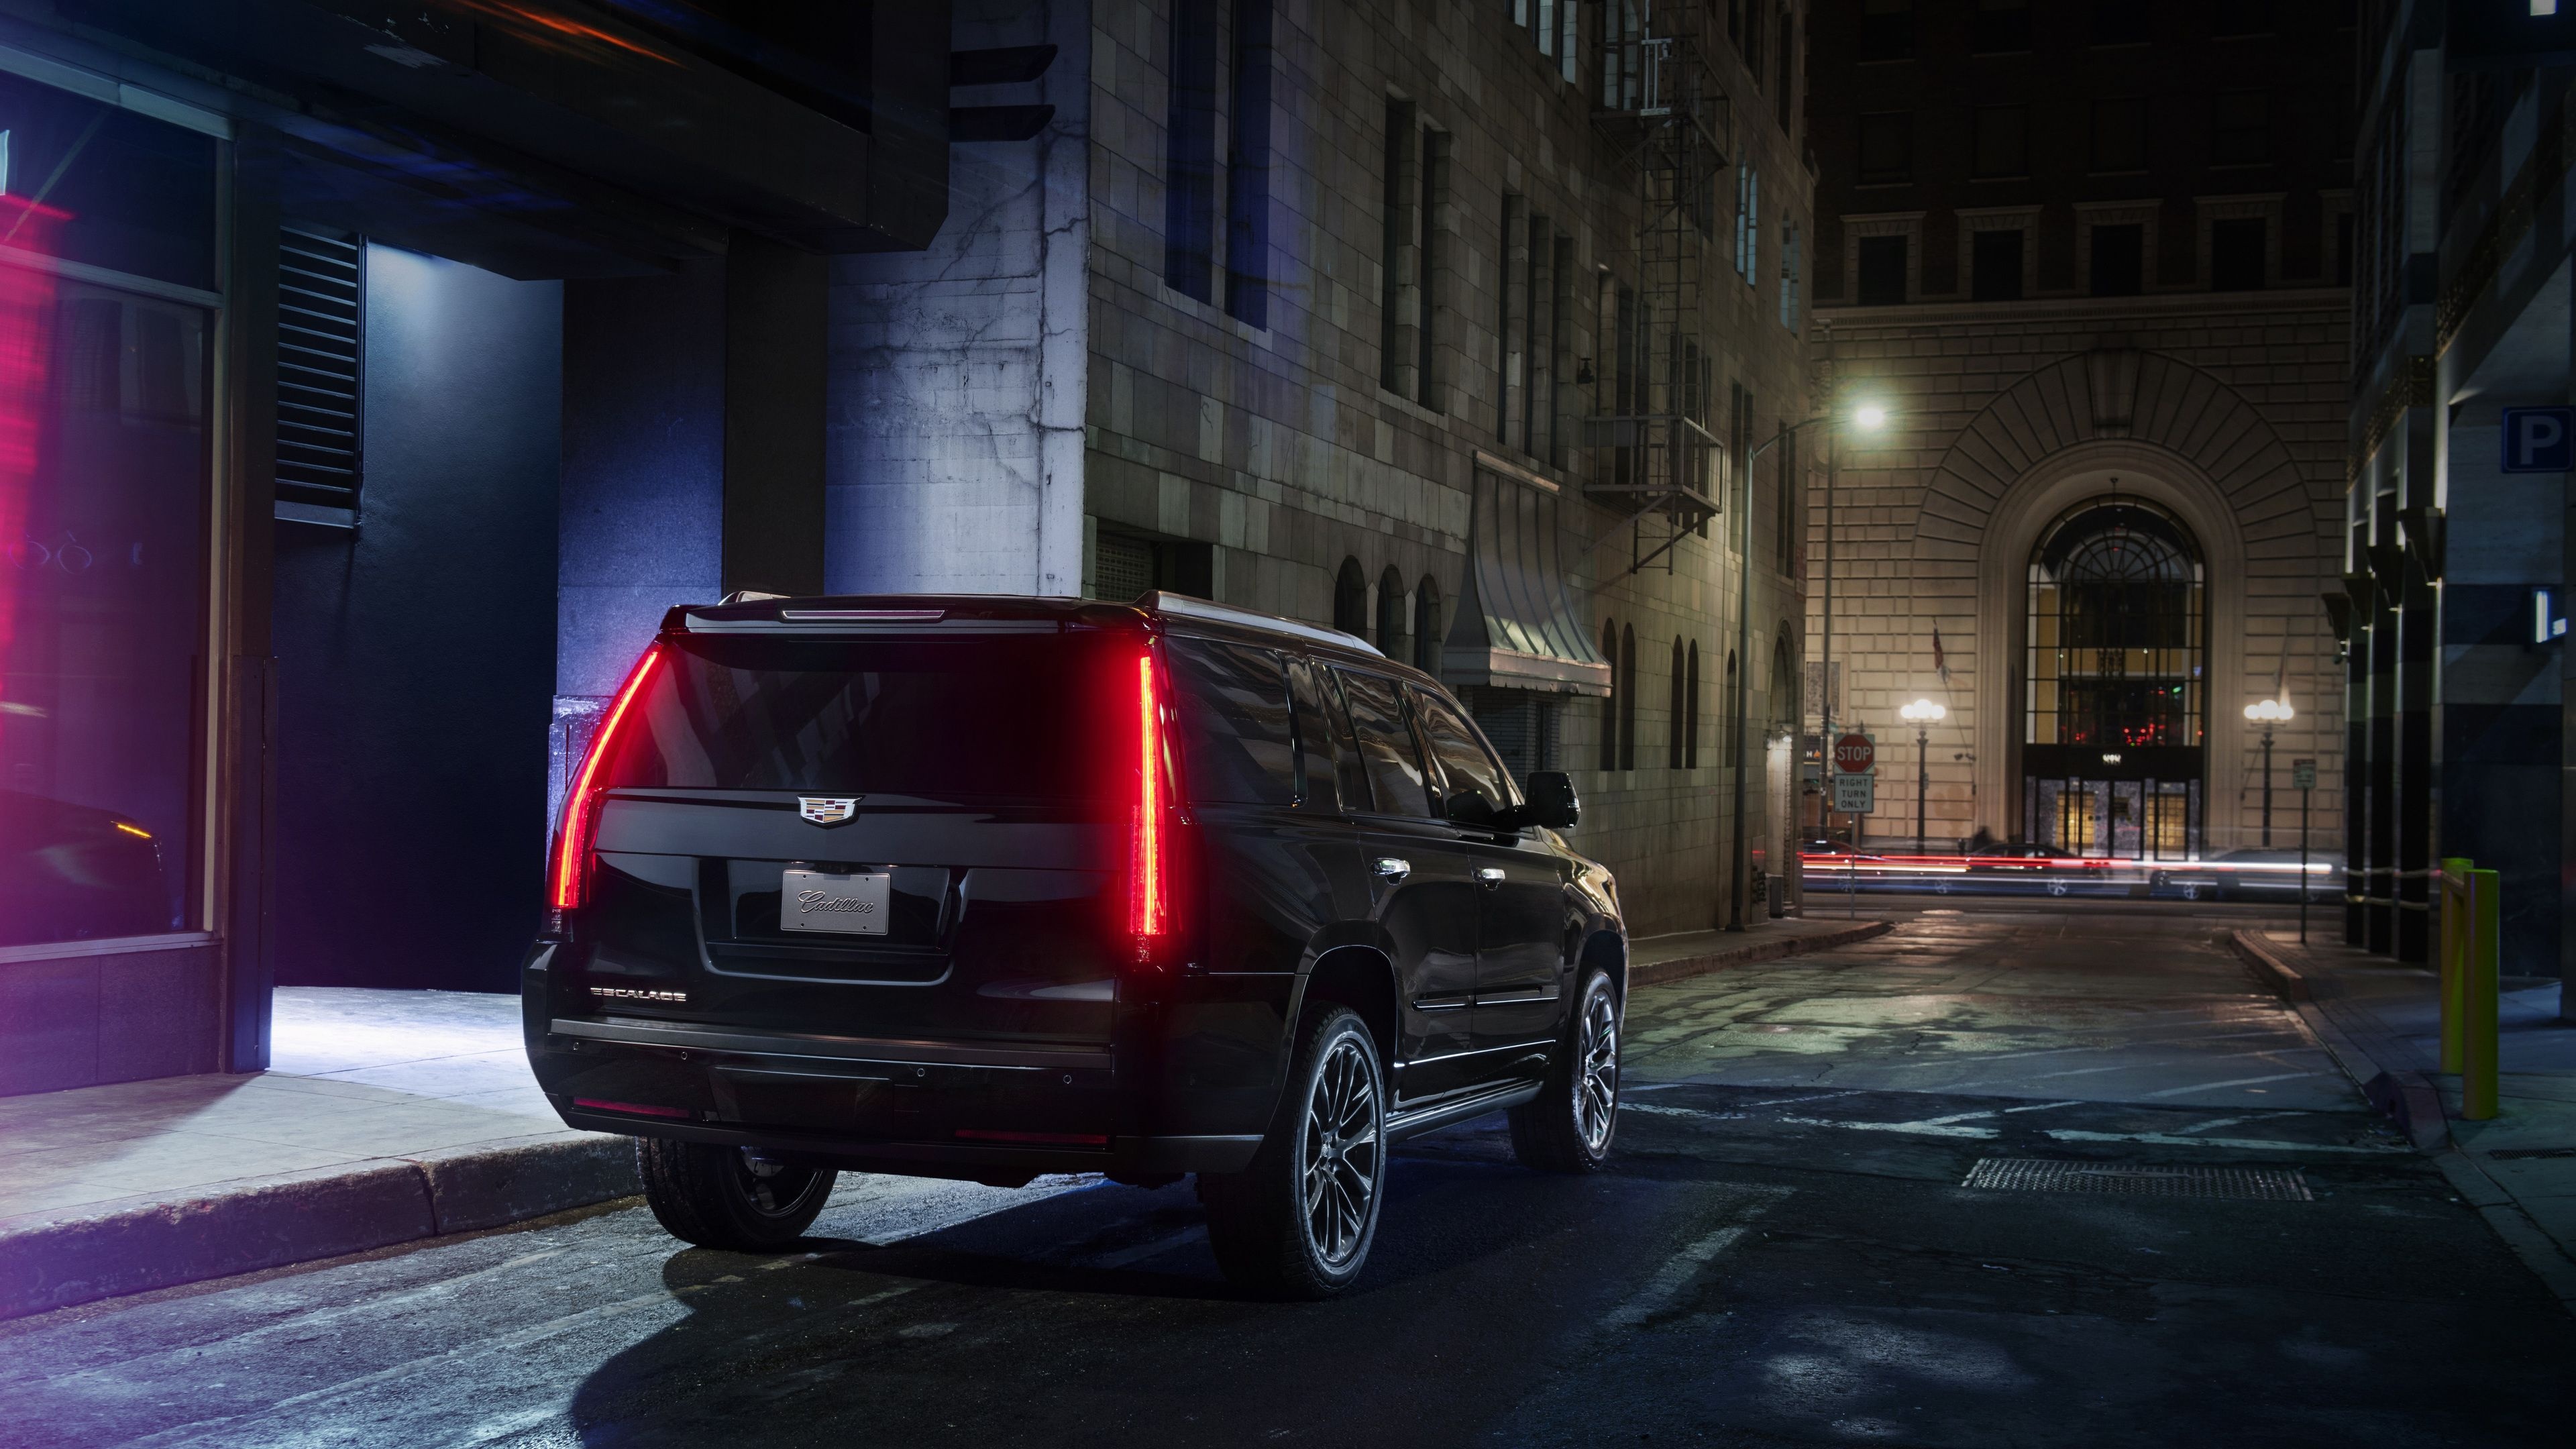 Cadillac Escalade, Top free backgrounds, Luxury SUV, Iconic styling, 3840x2160 4K Desktop